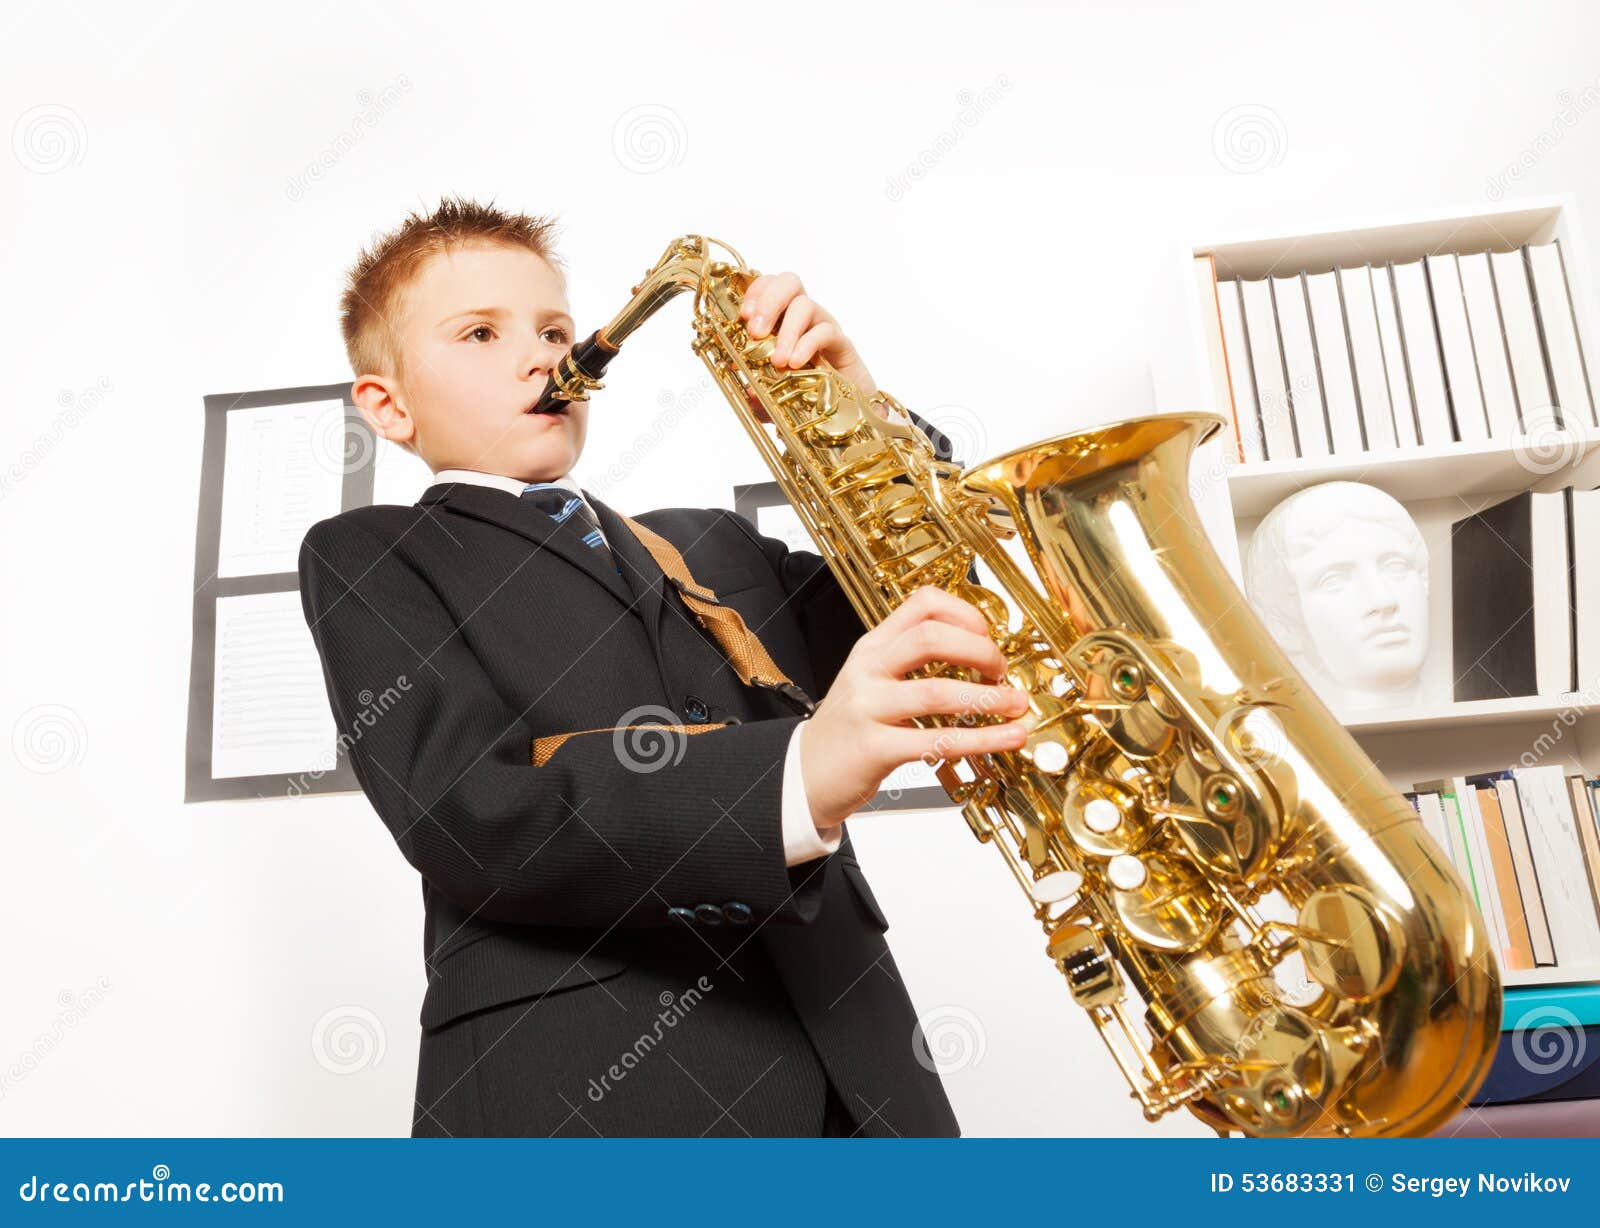 boys and girls sax